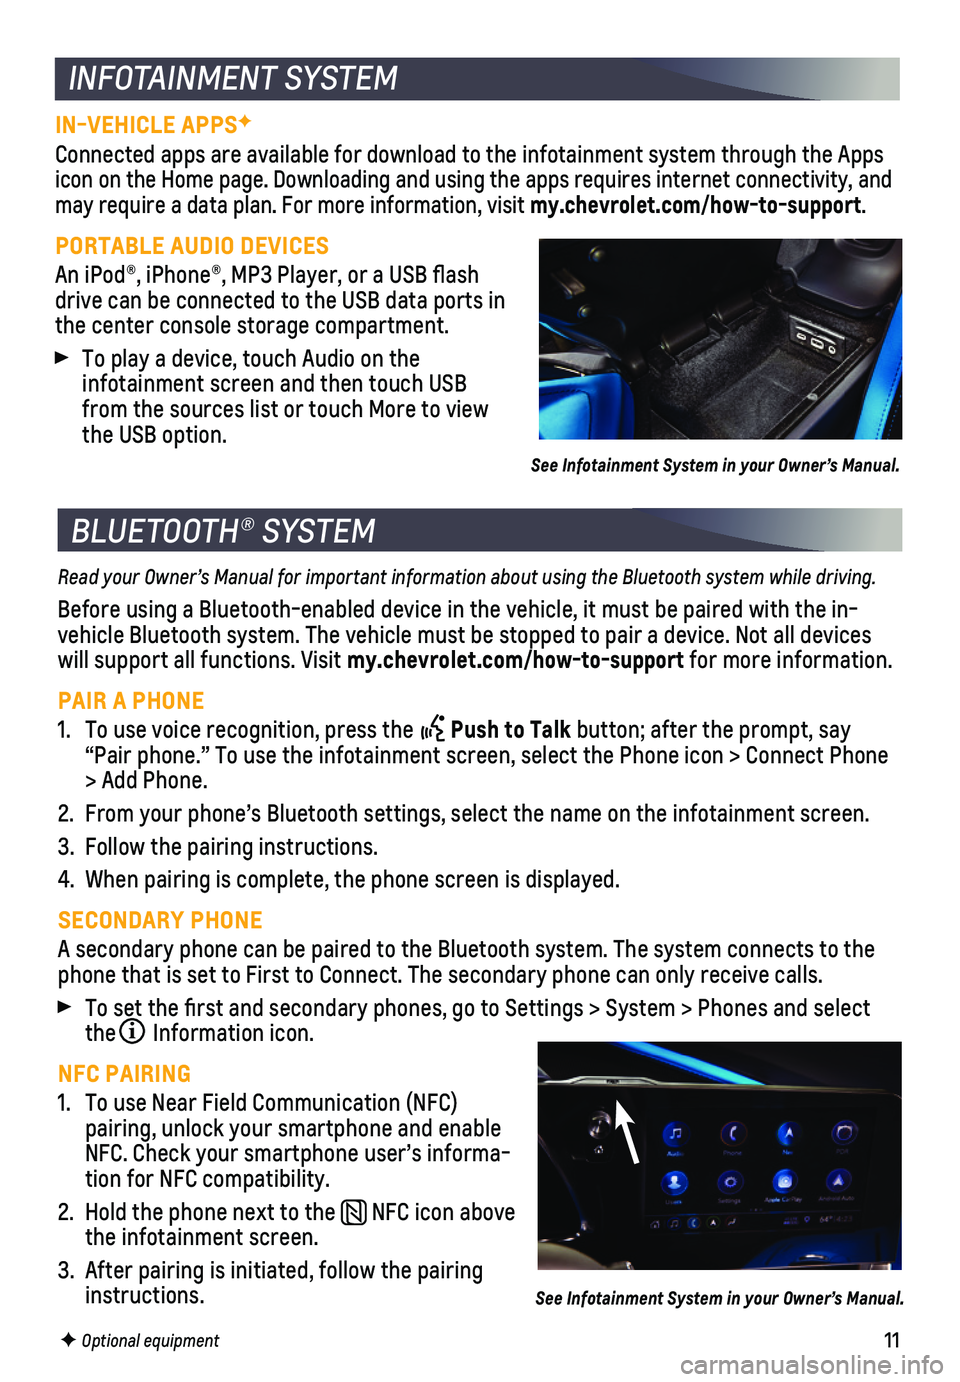 CHEVROLET CORVETTE 2021  Get To Know Guide 11
Read your Owner’s Manual for important information about using the Bluetooth system while driving.
Before using a Bluetooth-enabled device in the vehicle, it must be paire\
d with the in-vehicle 